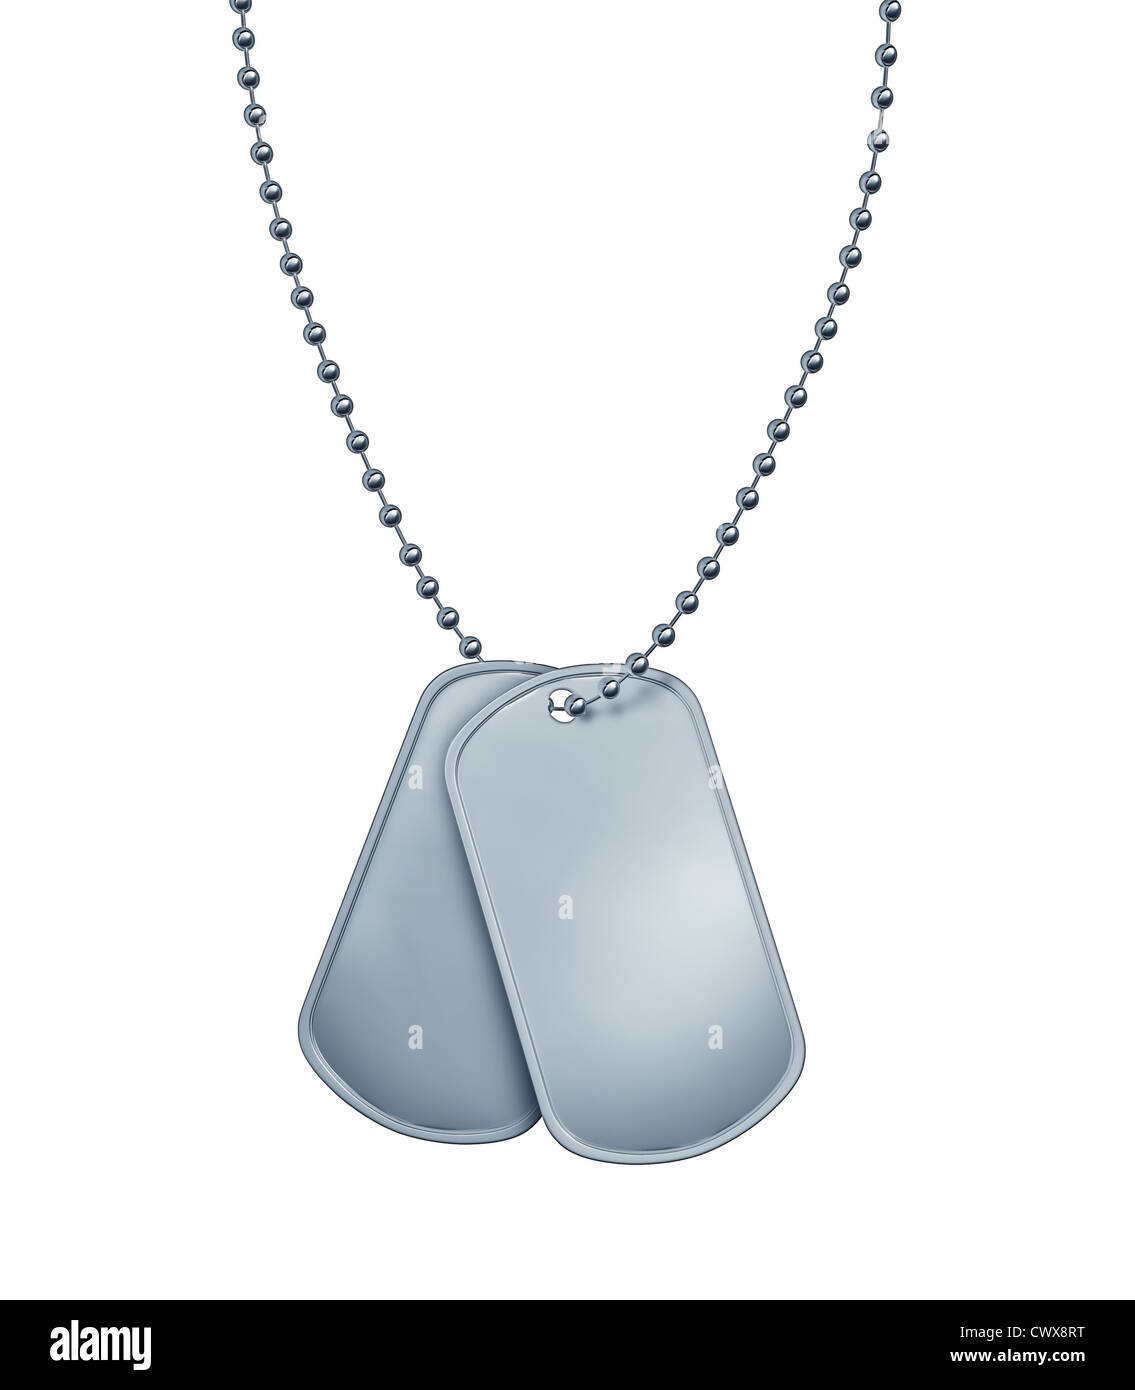 Dog Tags made of blank metal with beaded necklace isolated on white as a symbol of the American military identification of soldiers in a combat zone for emergency medical attention for wounded and fallen heroes. Stock Photo